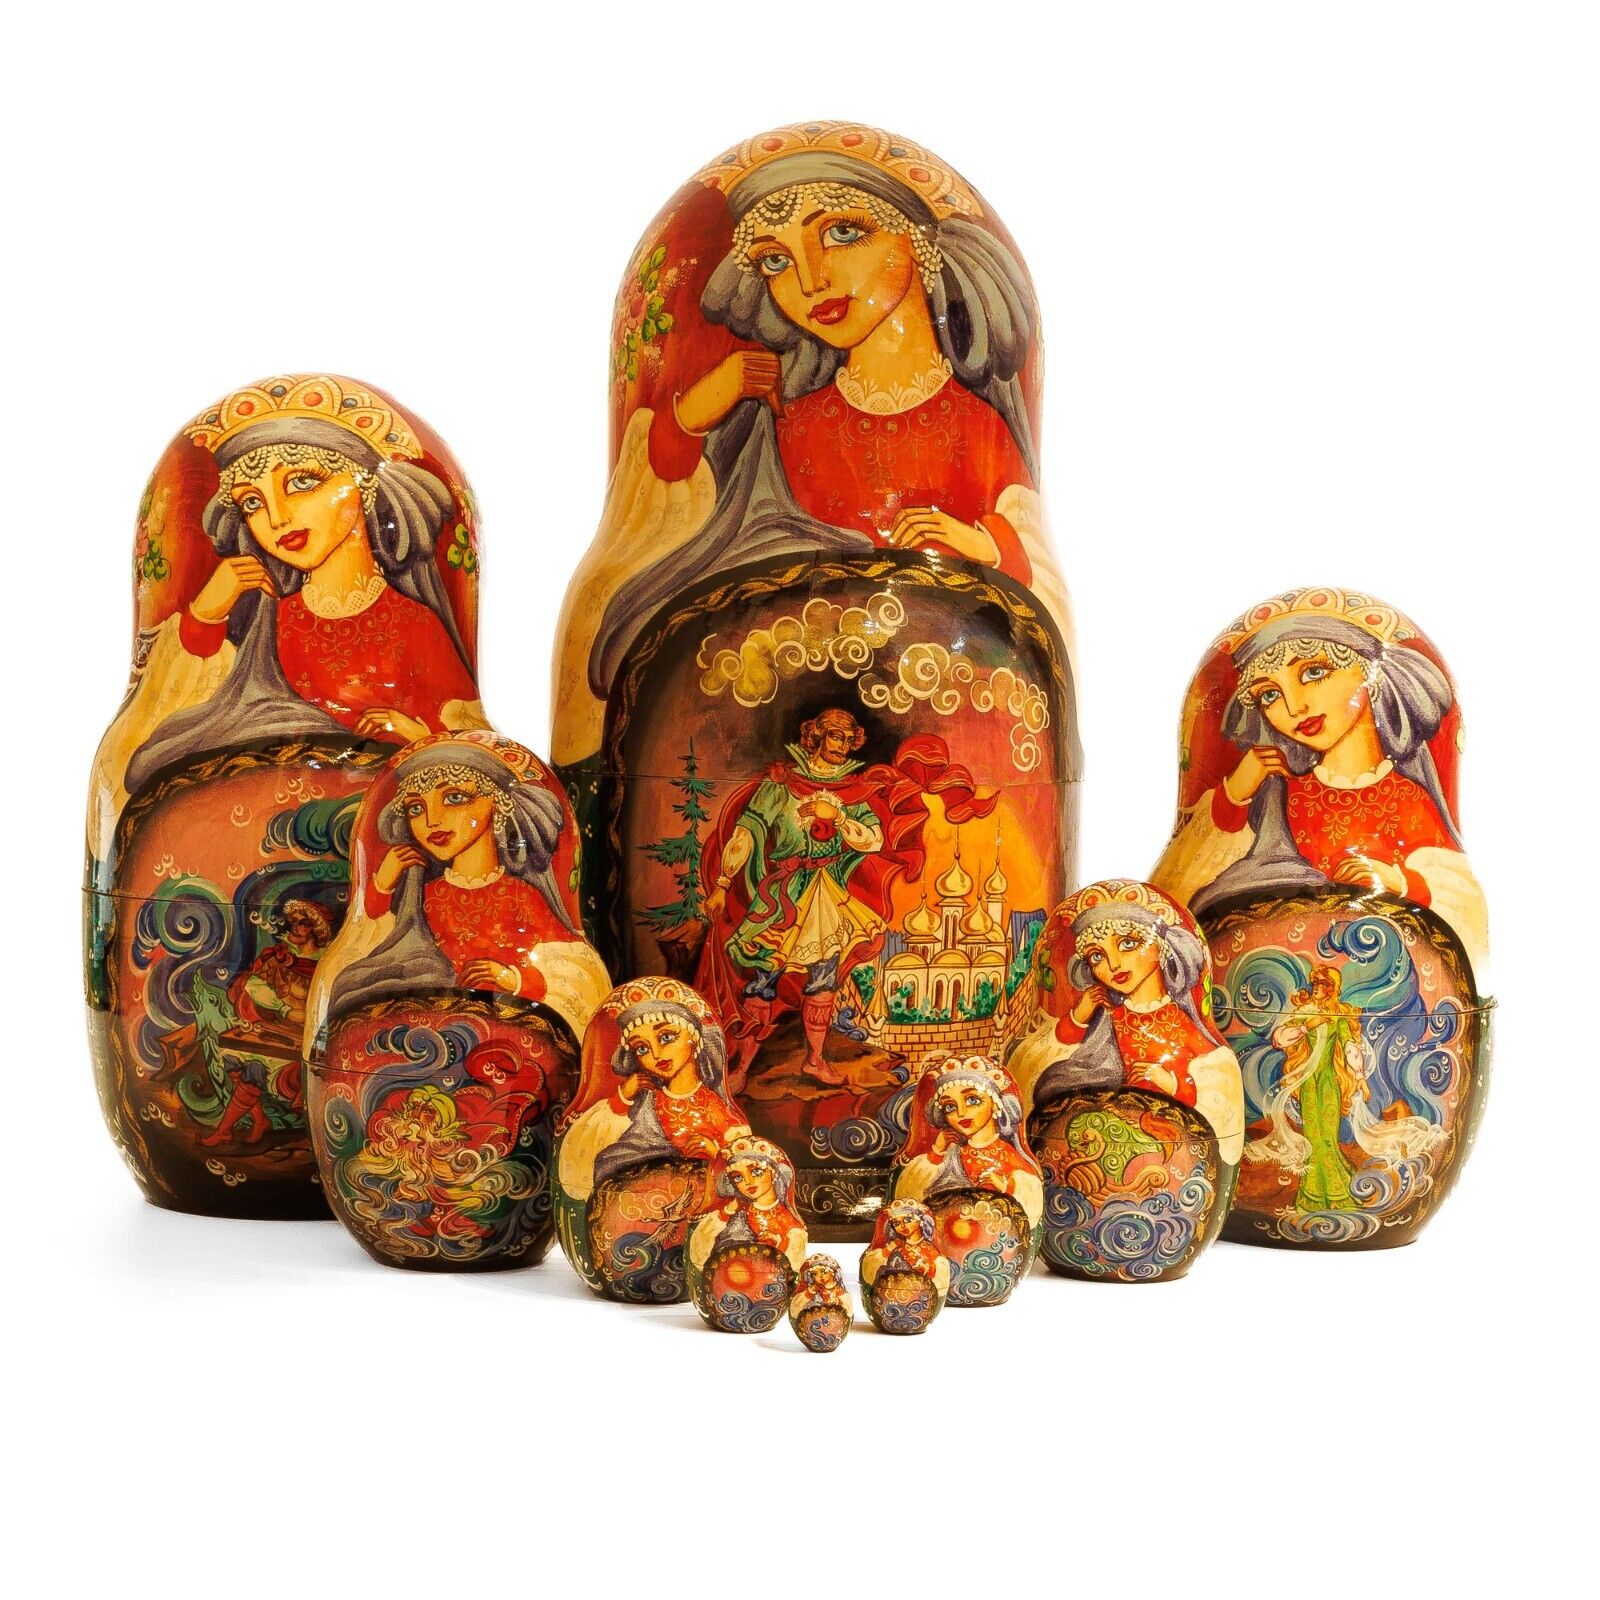 26cm Russian Matryoshka Nesting Doll : Set of 10, Painted with Folk Tale Scenes